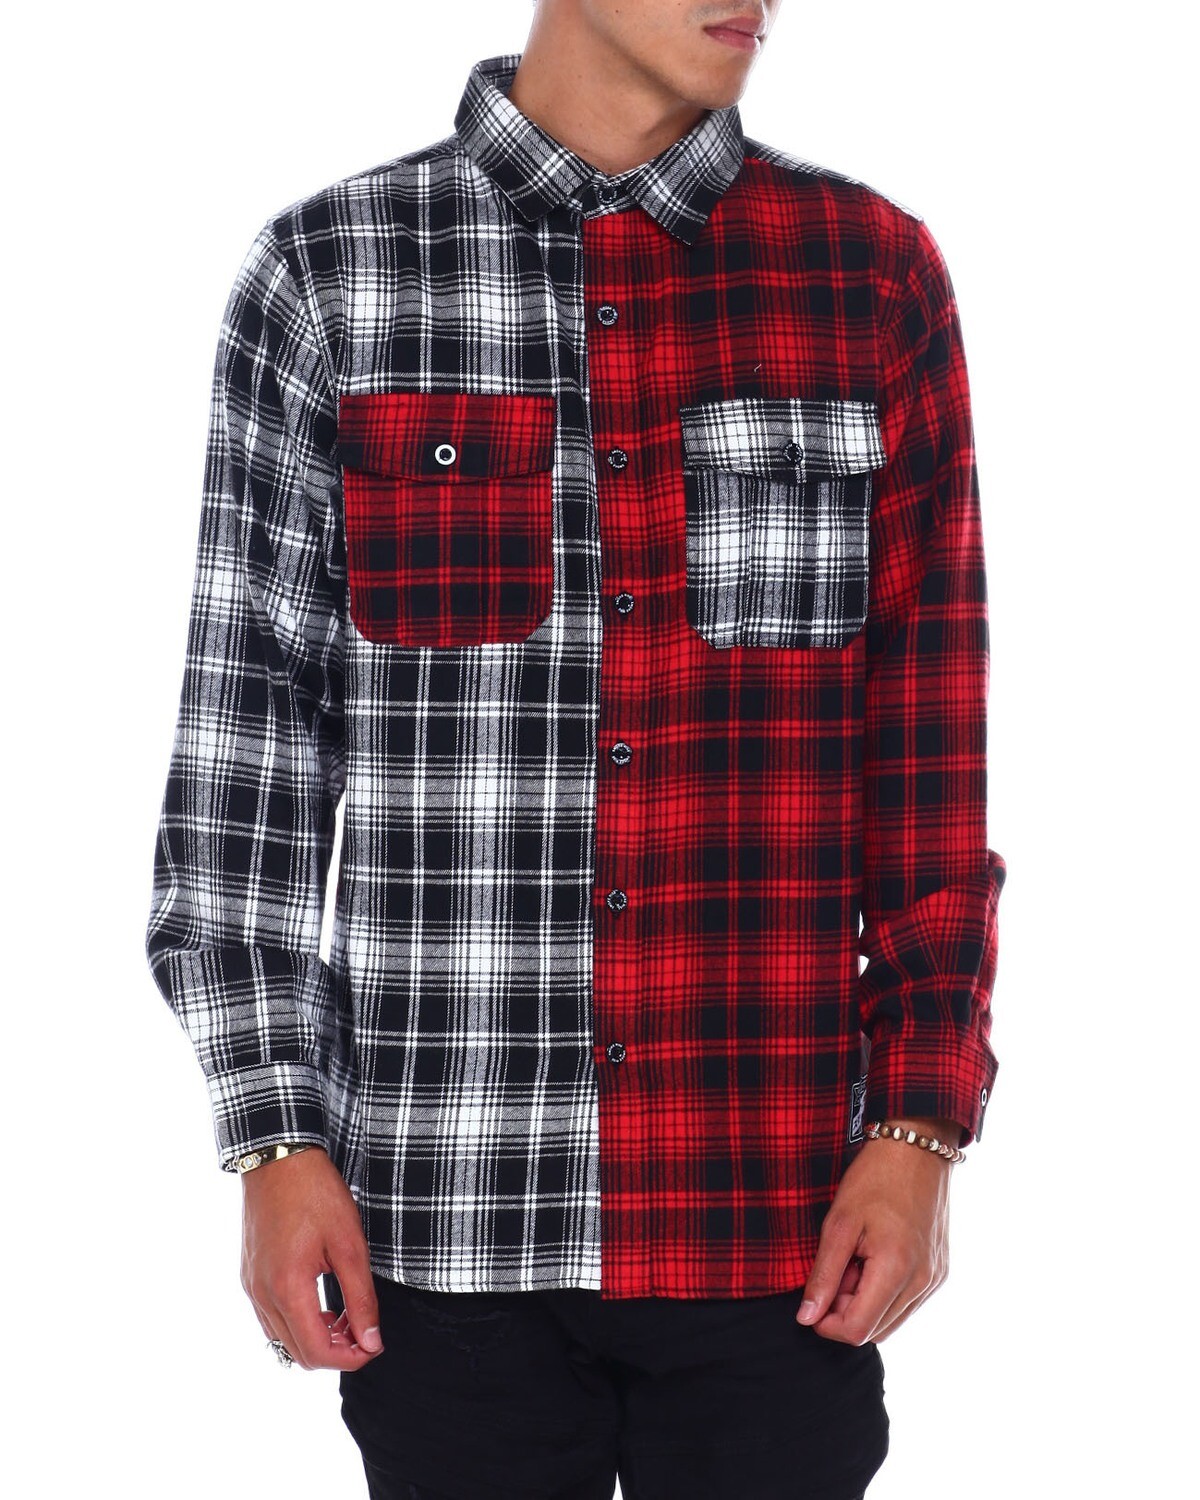 Two Tone Patch Work Long Sleeve Shirt